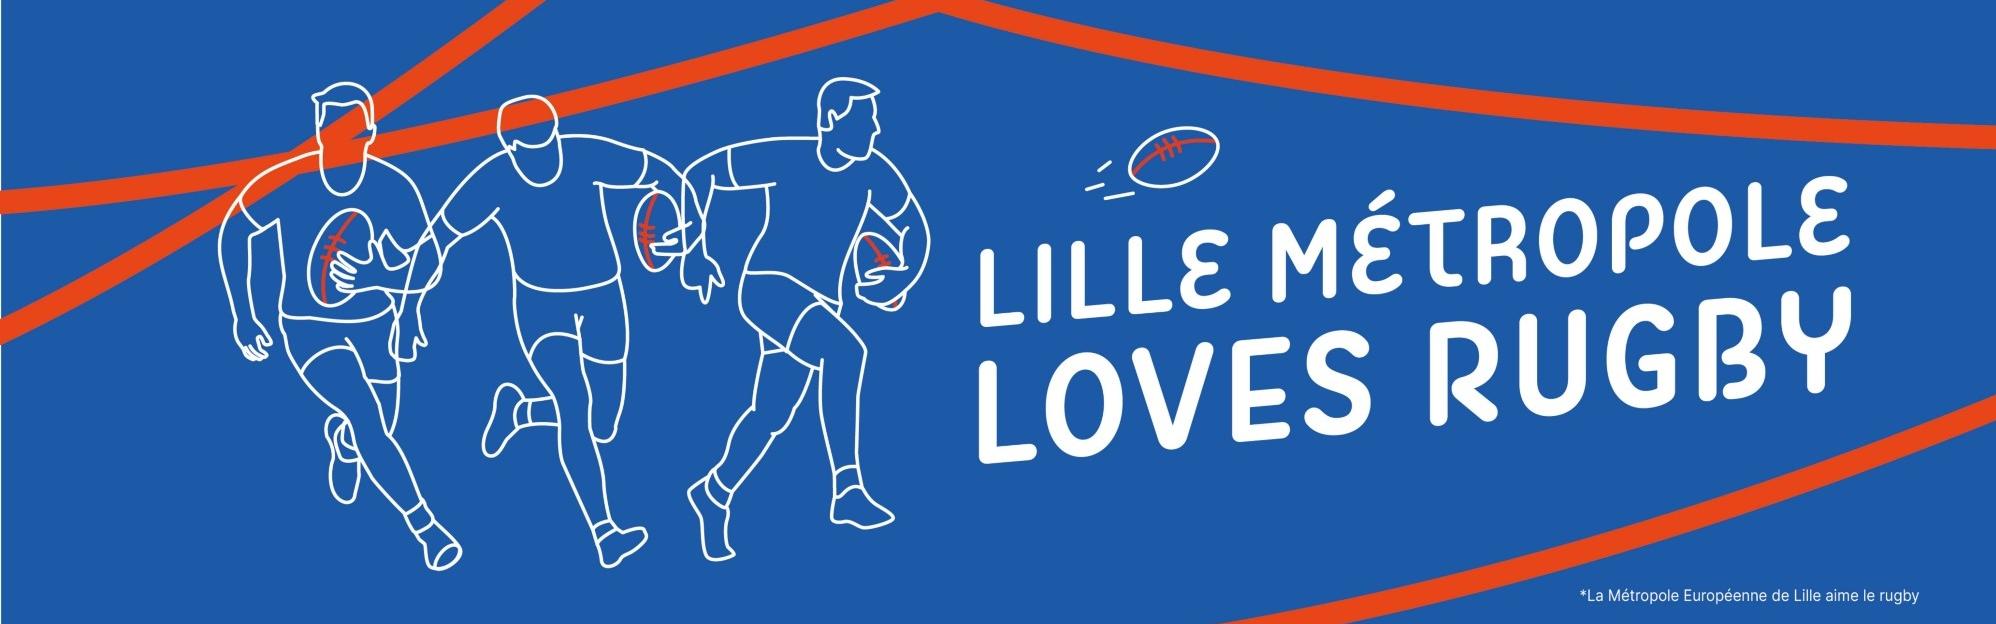 In 2023, Lille Metropole will host the Rugby World Cup !